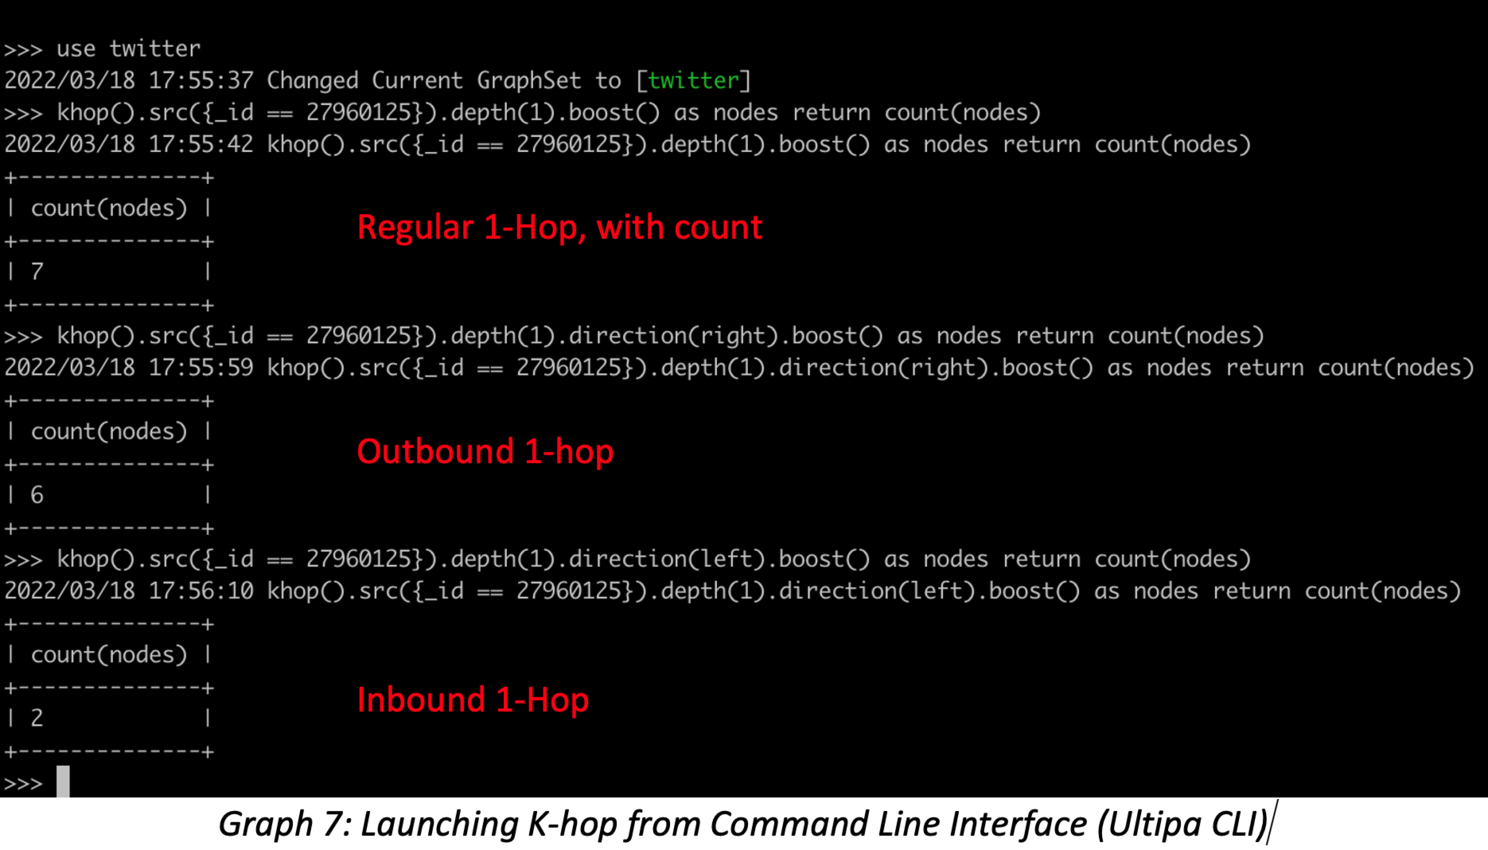 Launching K-hop from Command Line Interface.